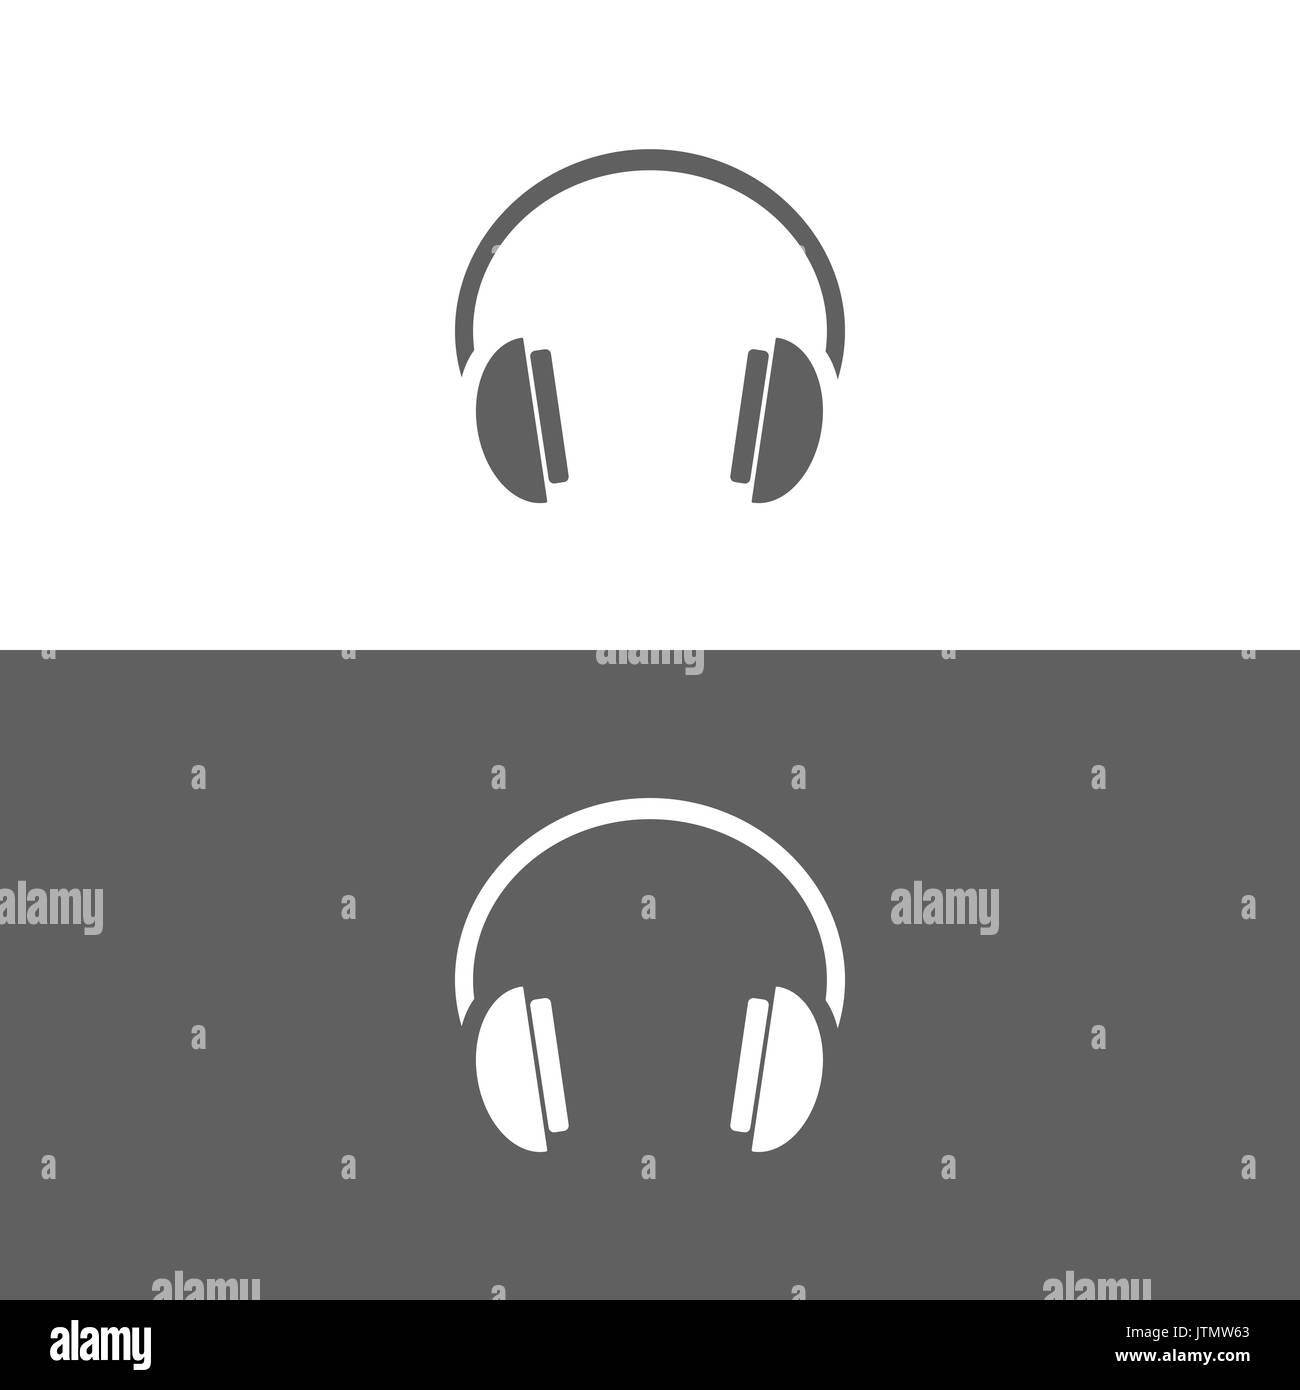 Headphones icon on black and white background Stock Vector